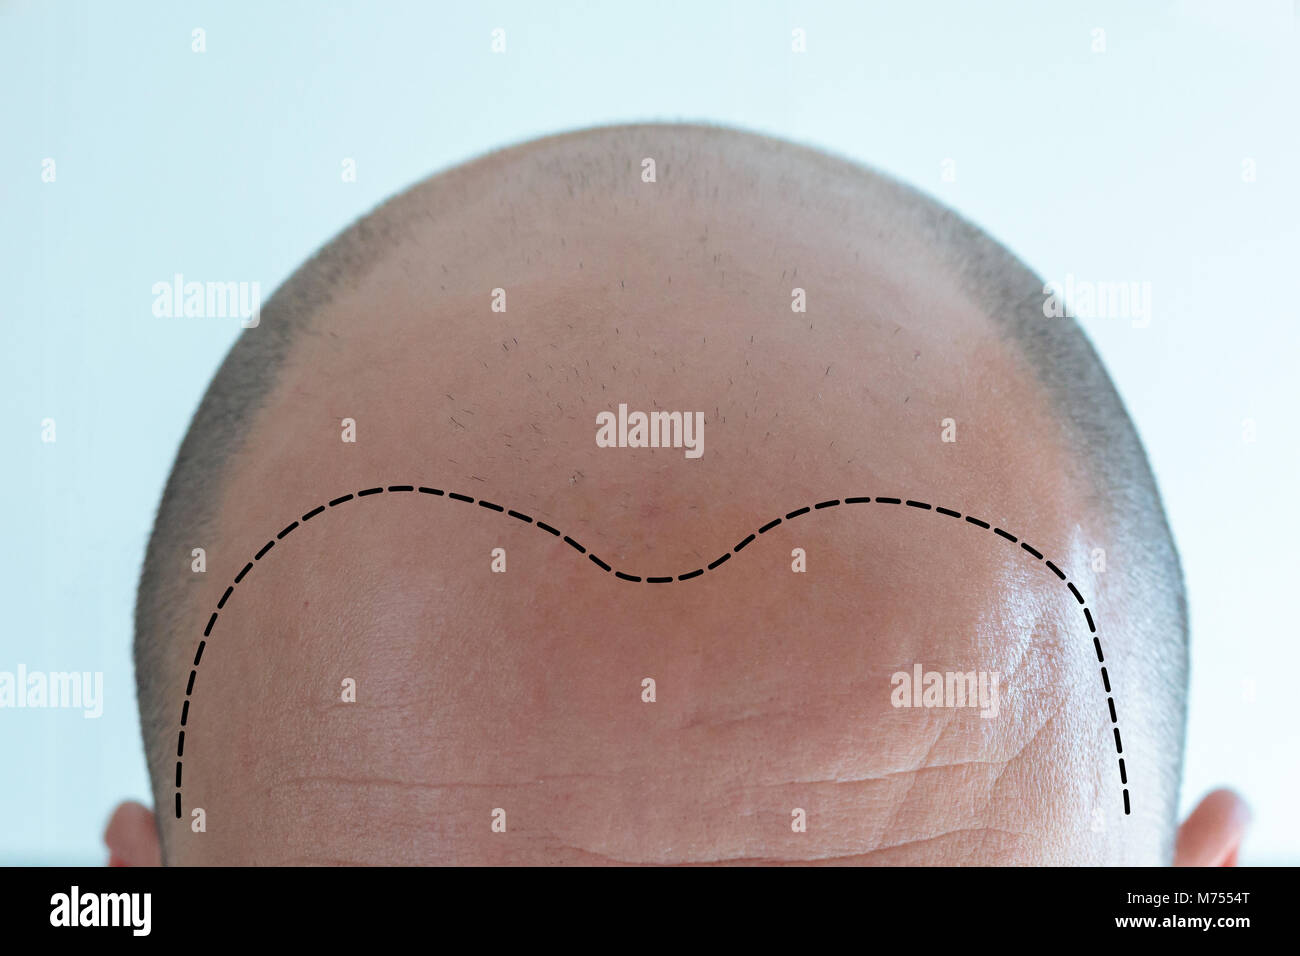 View of bald man's head with hair loss Stock Photo